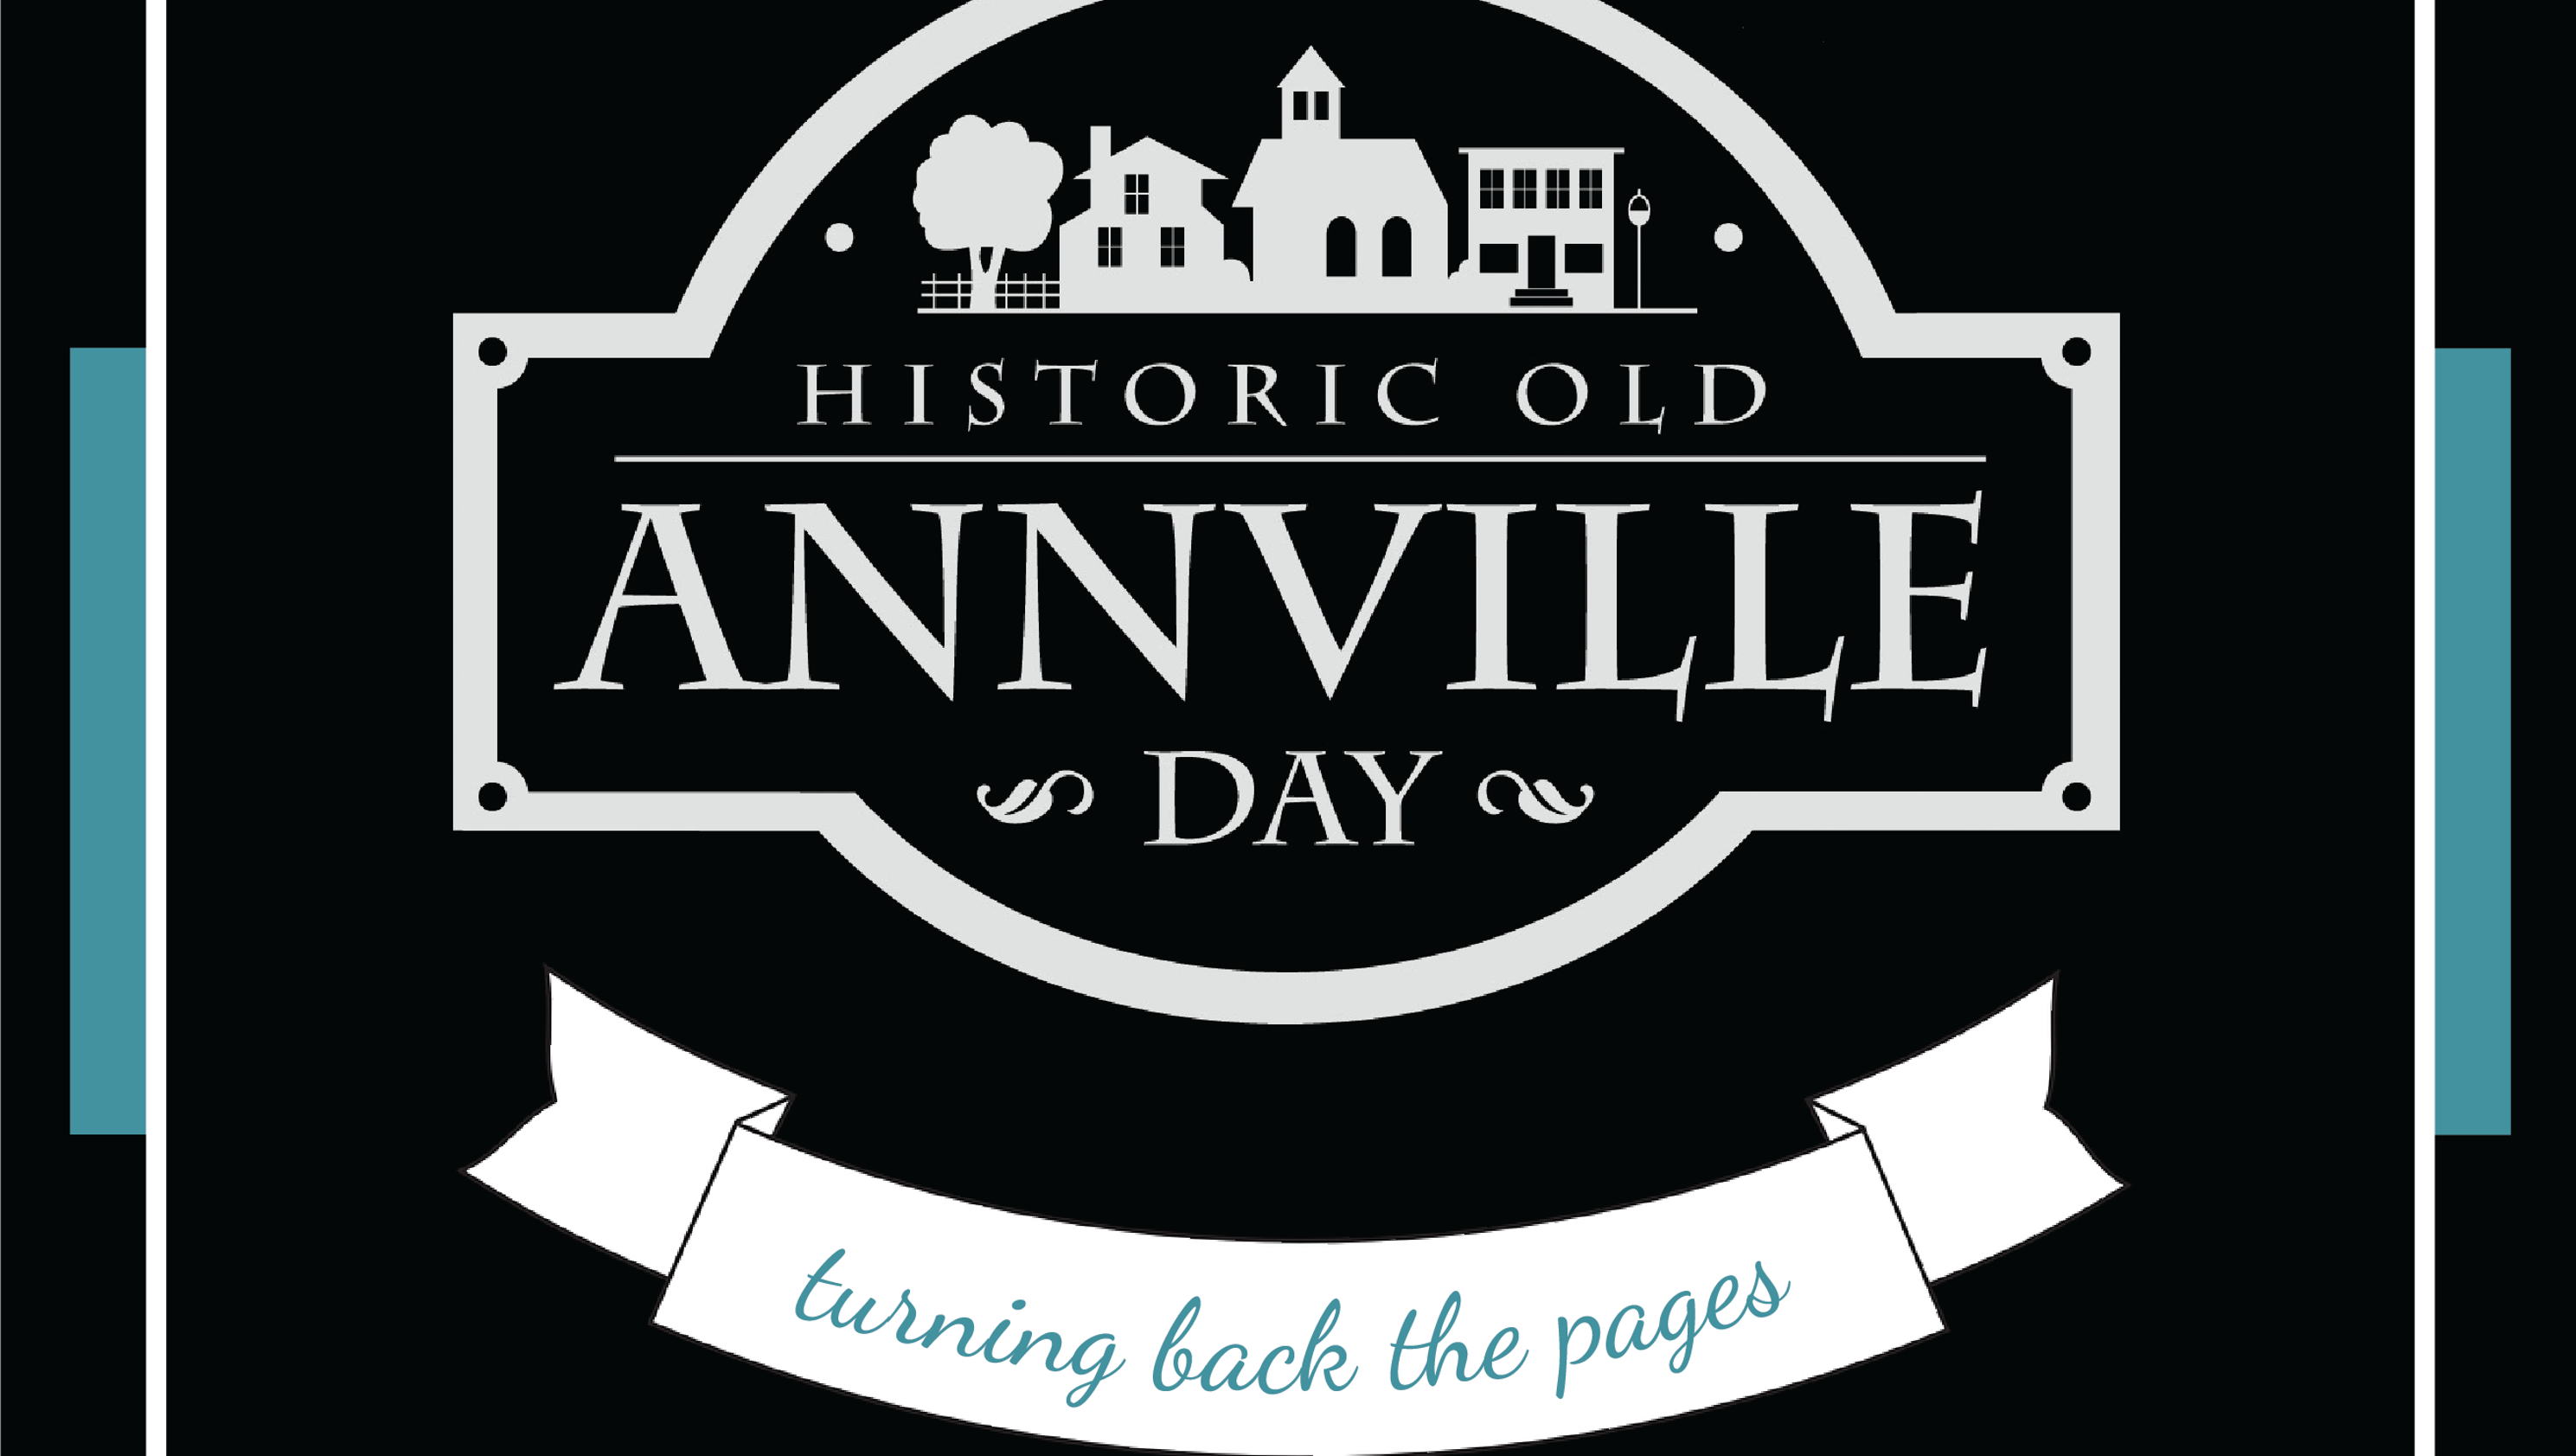 30th Historic Old Annville Day set for June 9